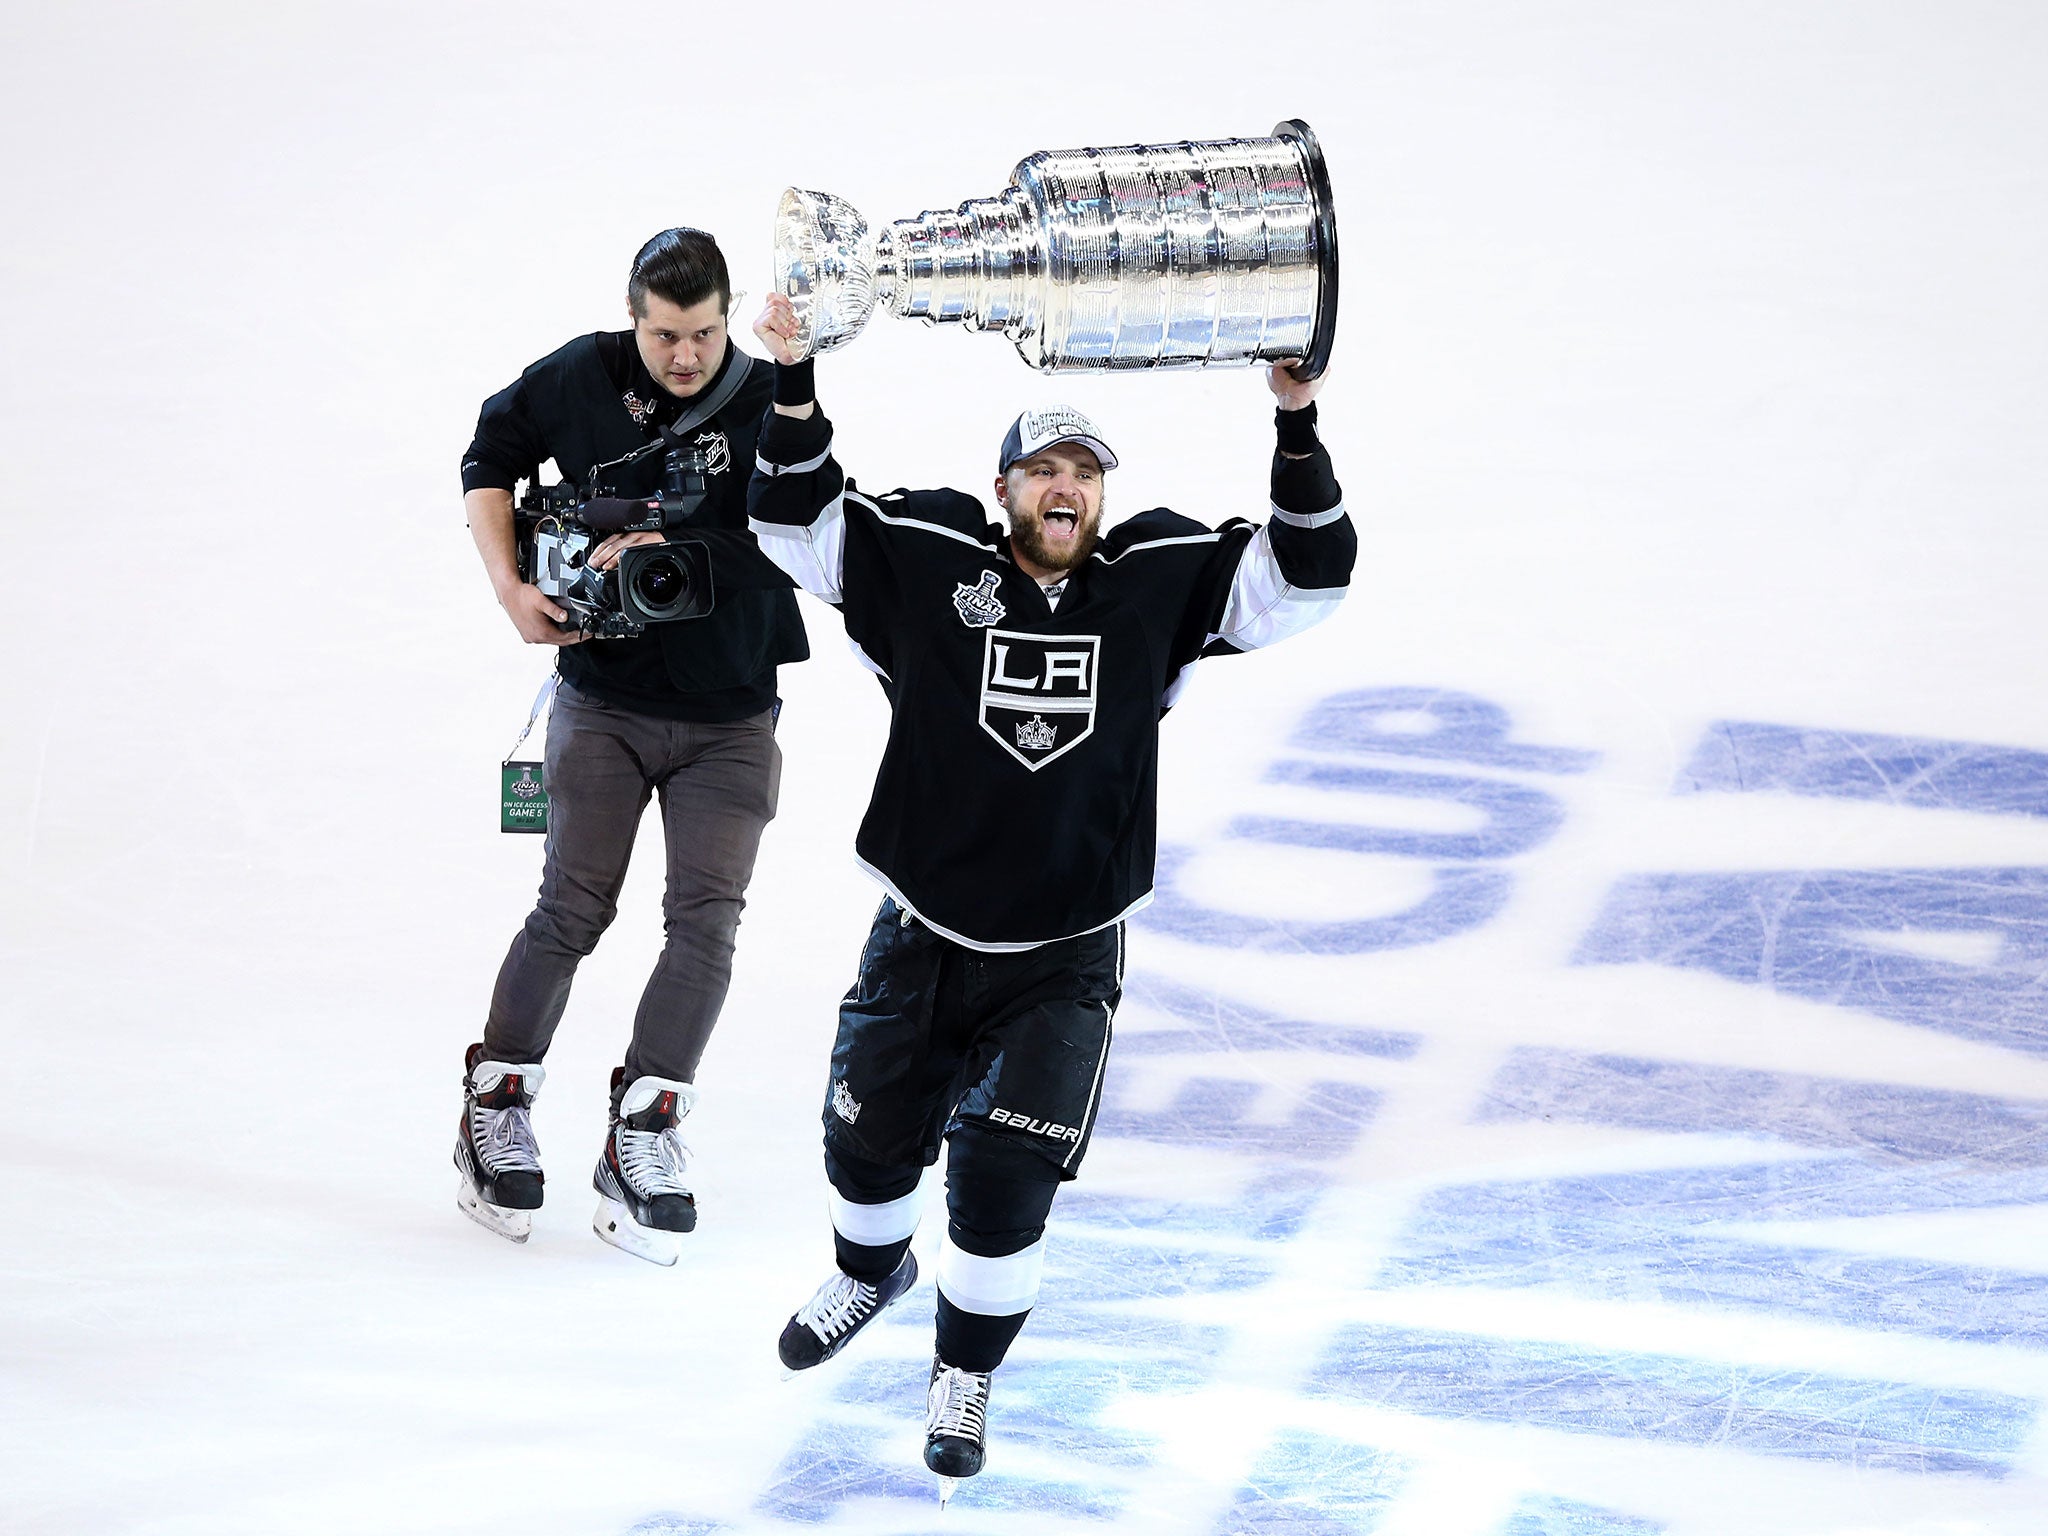 The Year of the Los Angeles Kings: Celebrating the 2012 Stanley Cup  Champions by NHL